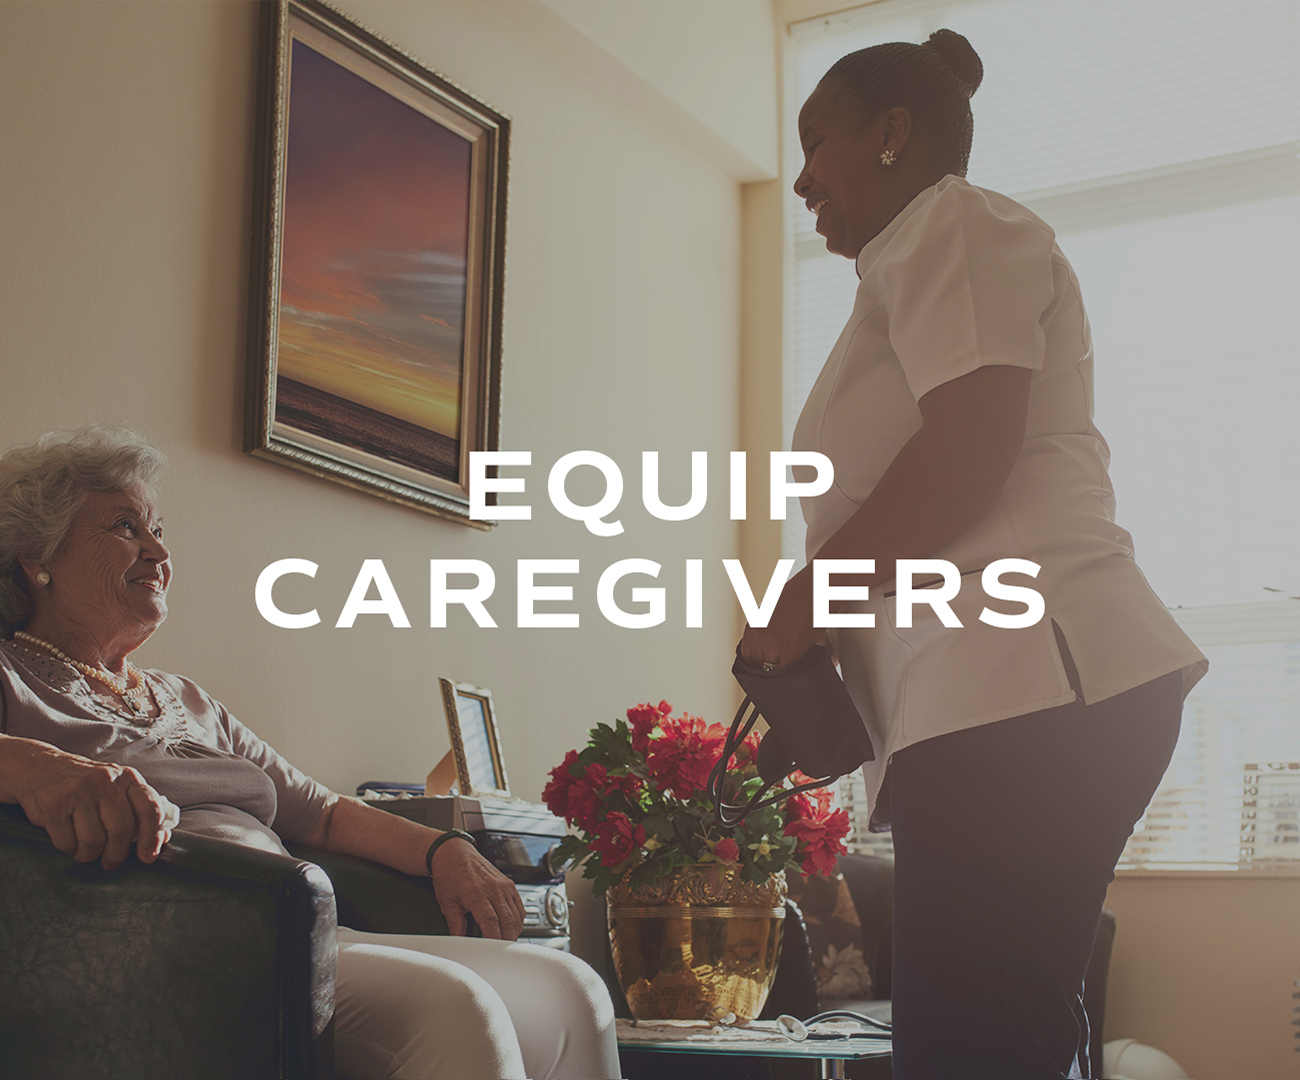 caregiver-resources-residential-assisted-living.jpg